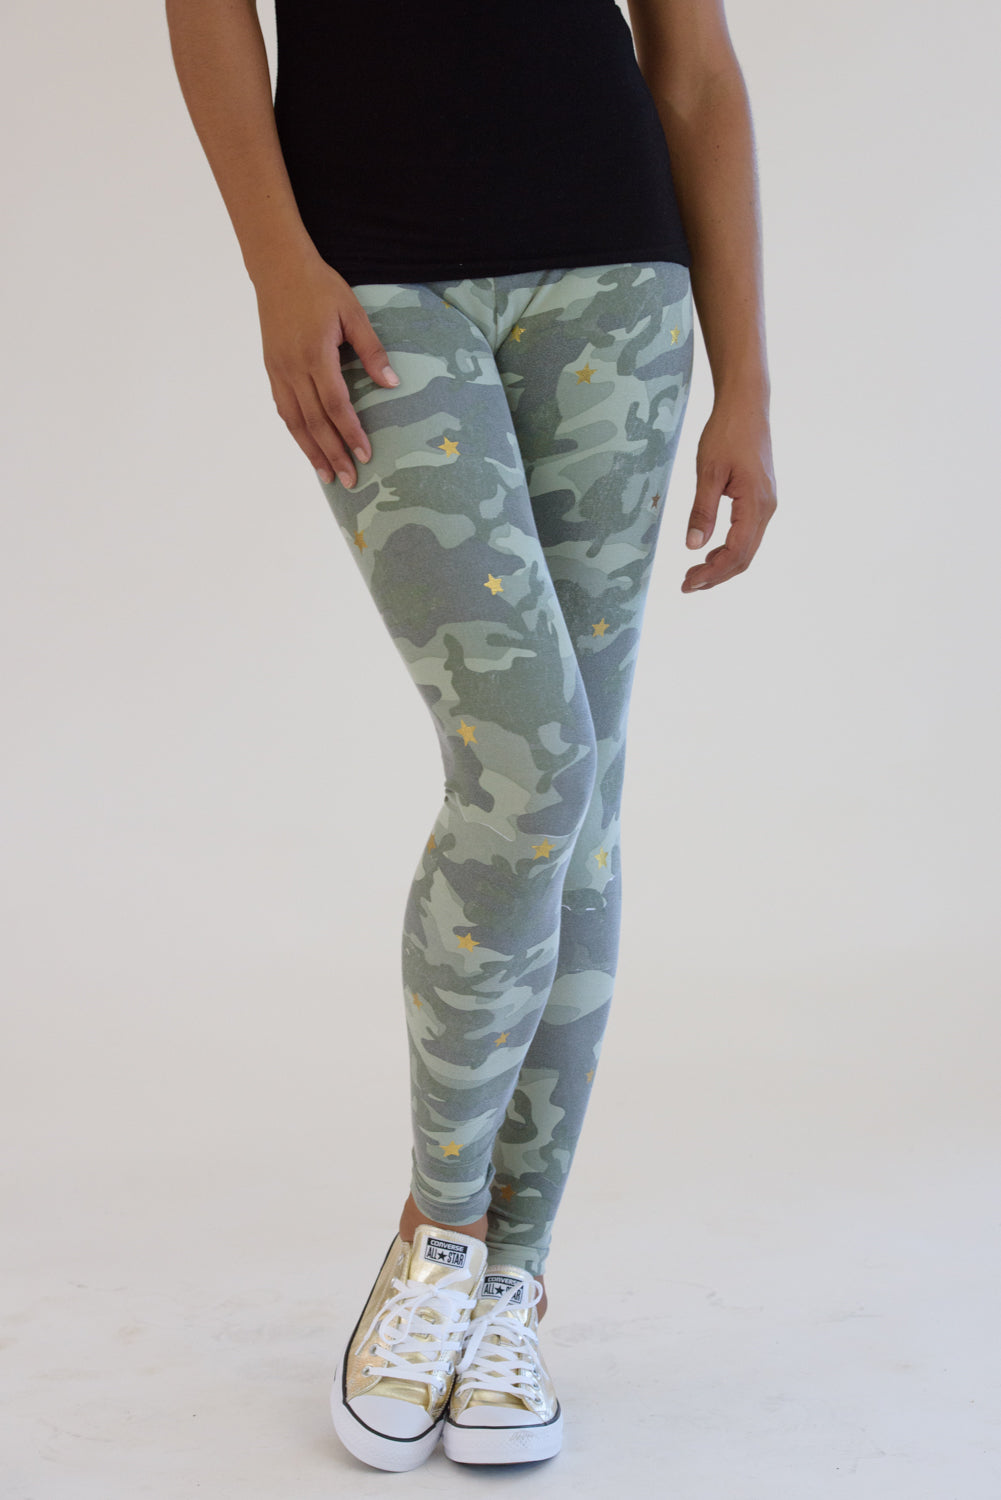 Vintage Washed Camo Leggings w/ Gold Stars